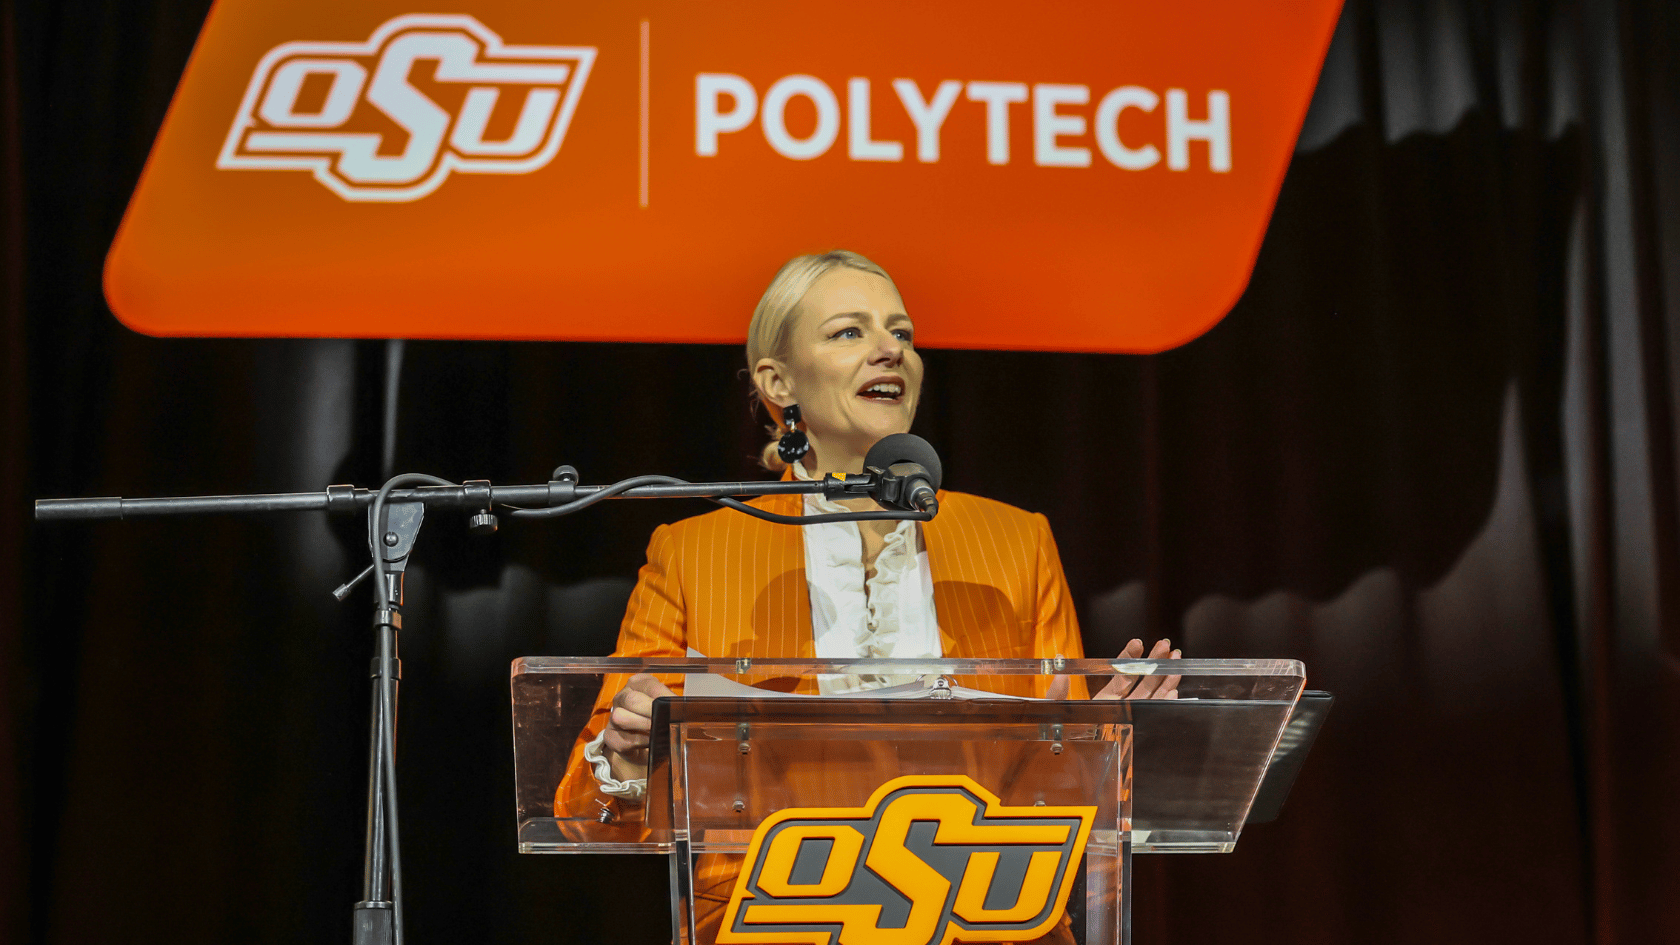 OSUIT's Industry-Driven Education at the Heart of New OSU Polytech Initiative Wednesday, December 13, 2023